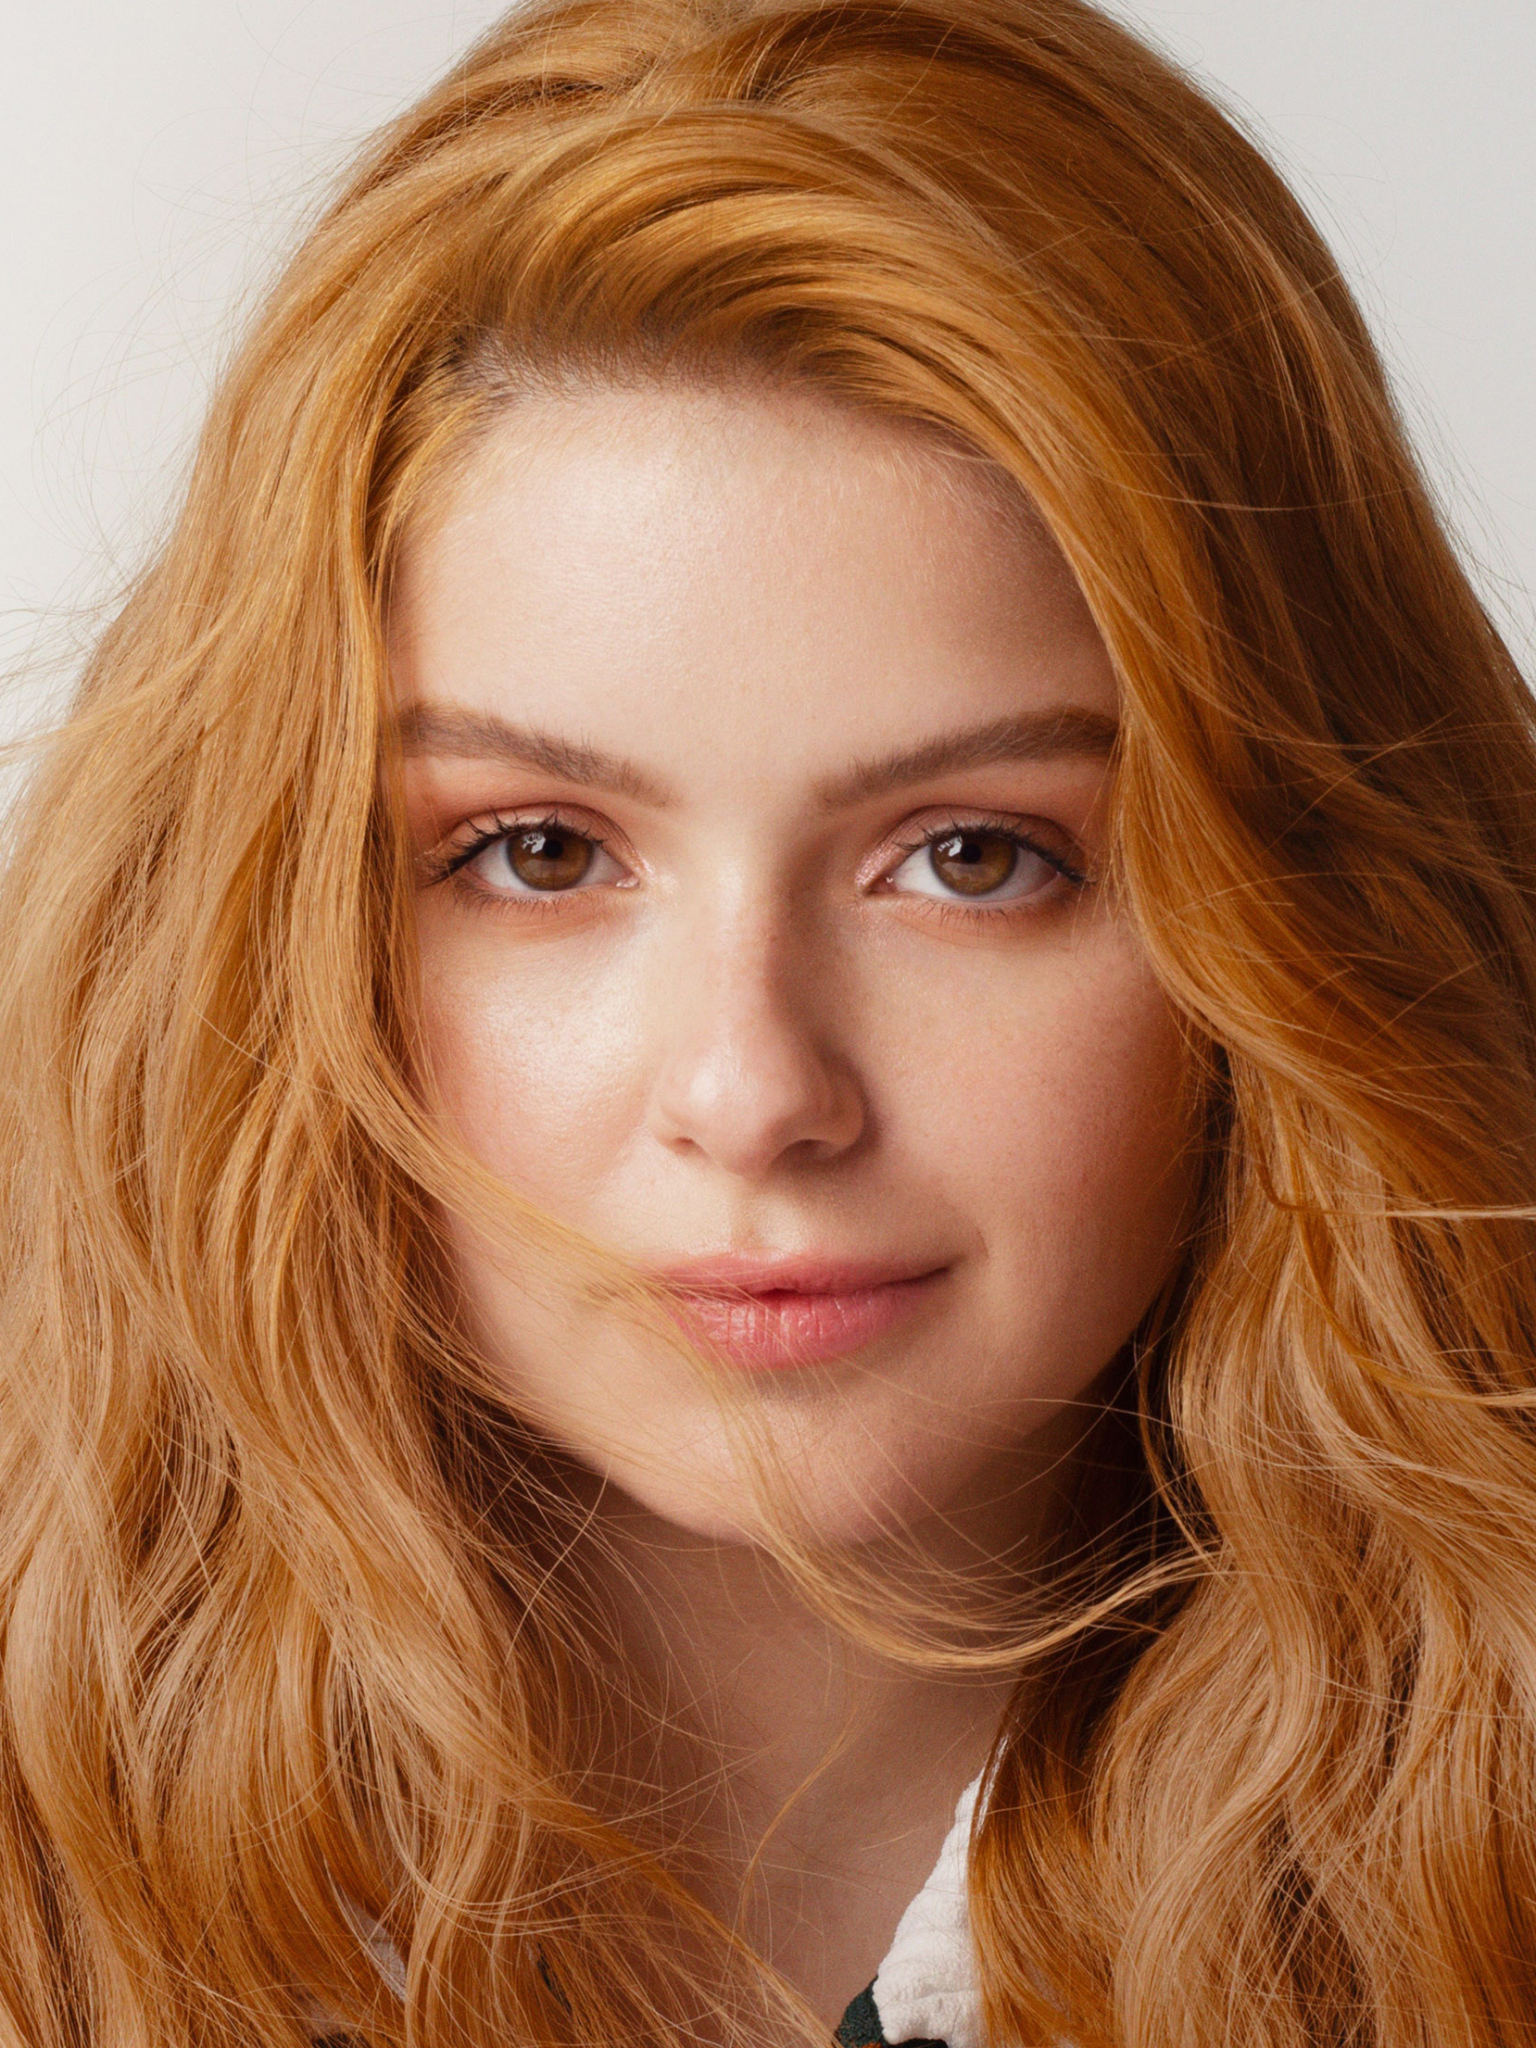 ariel winter, celebrity, face, brown eyes, actress, redhead